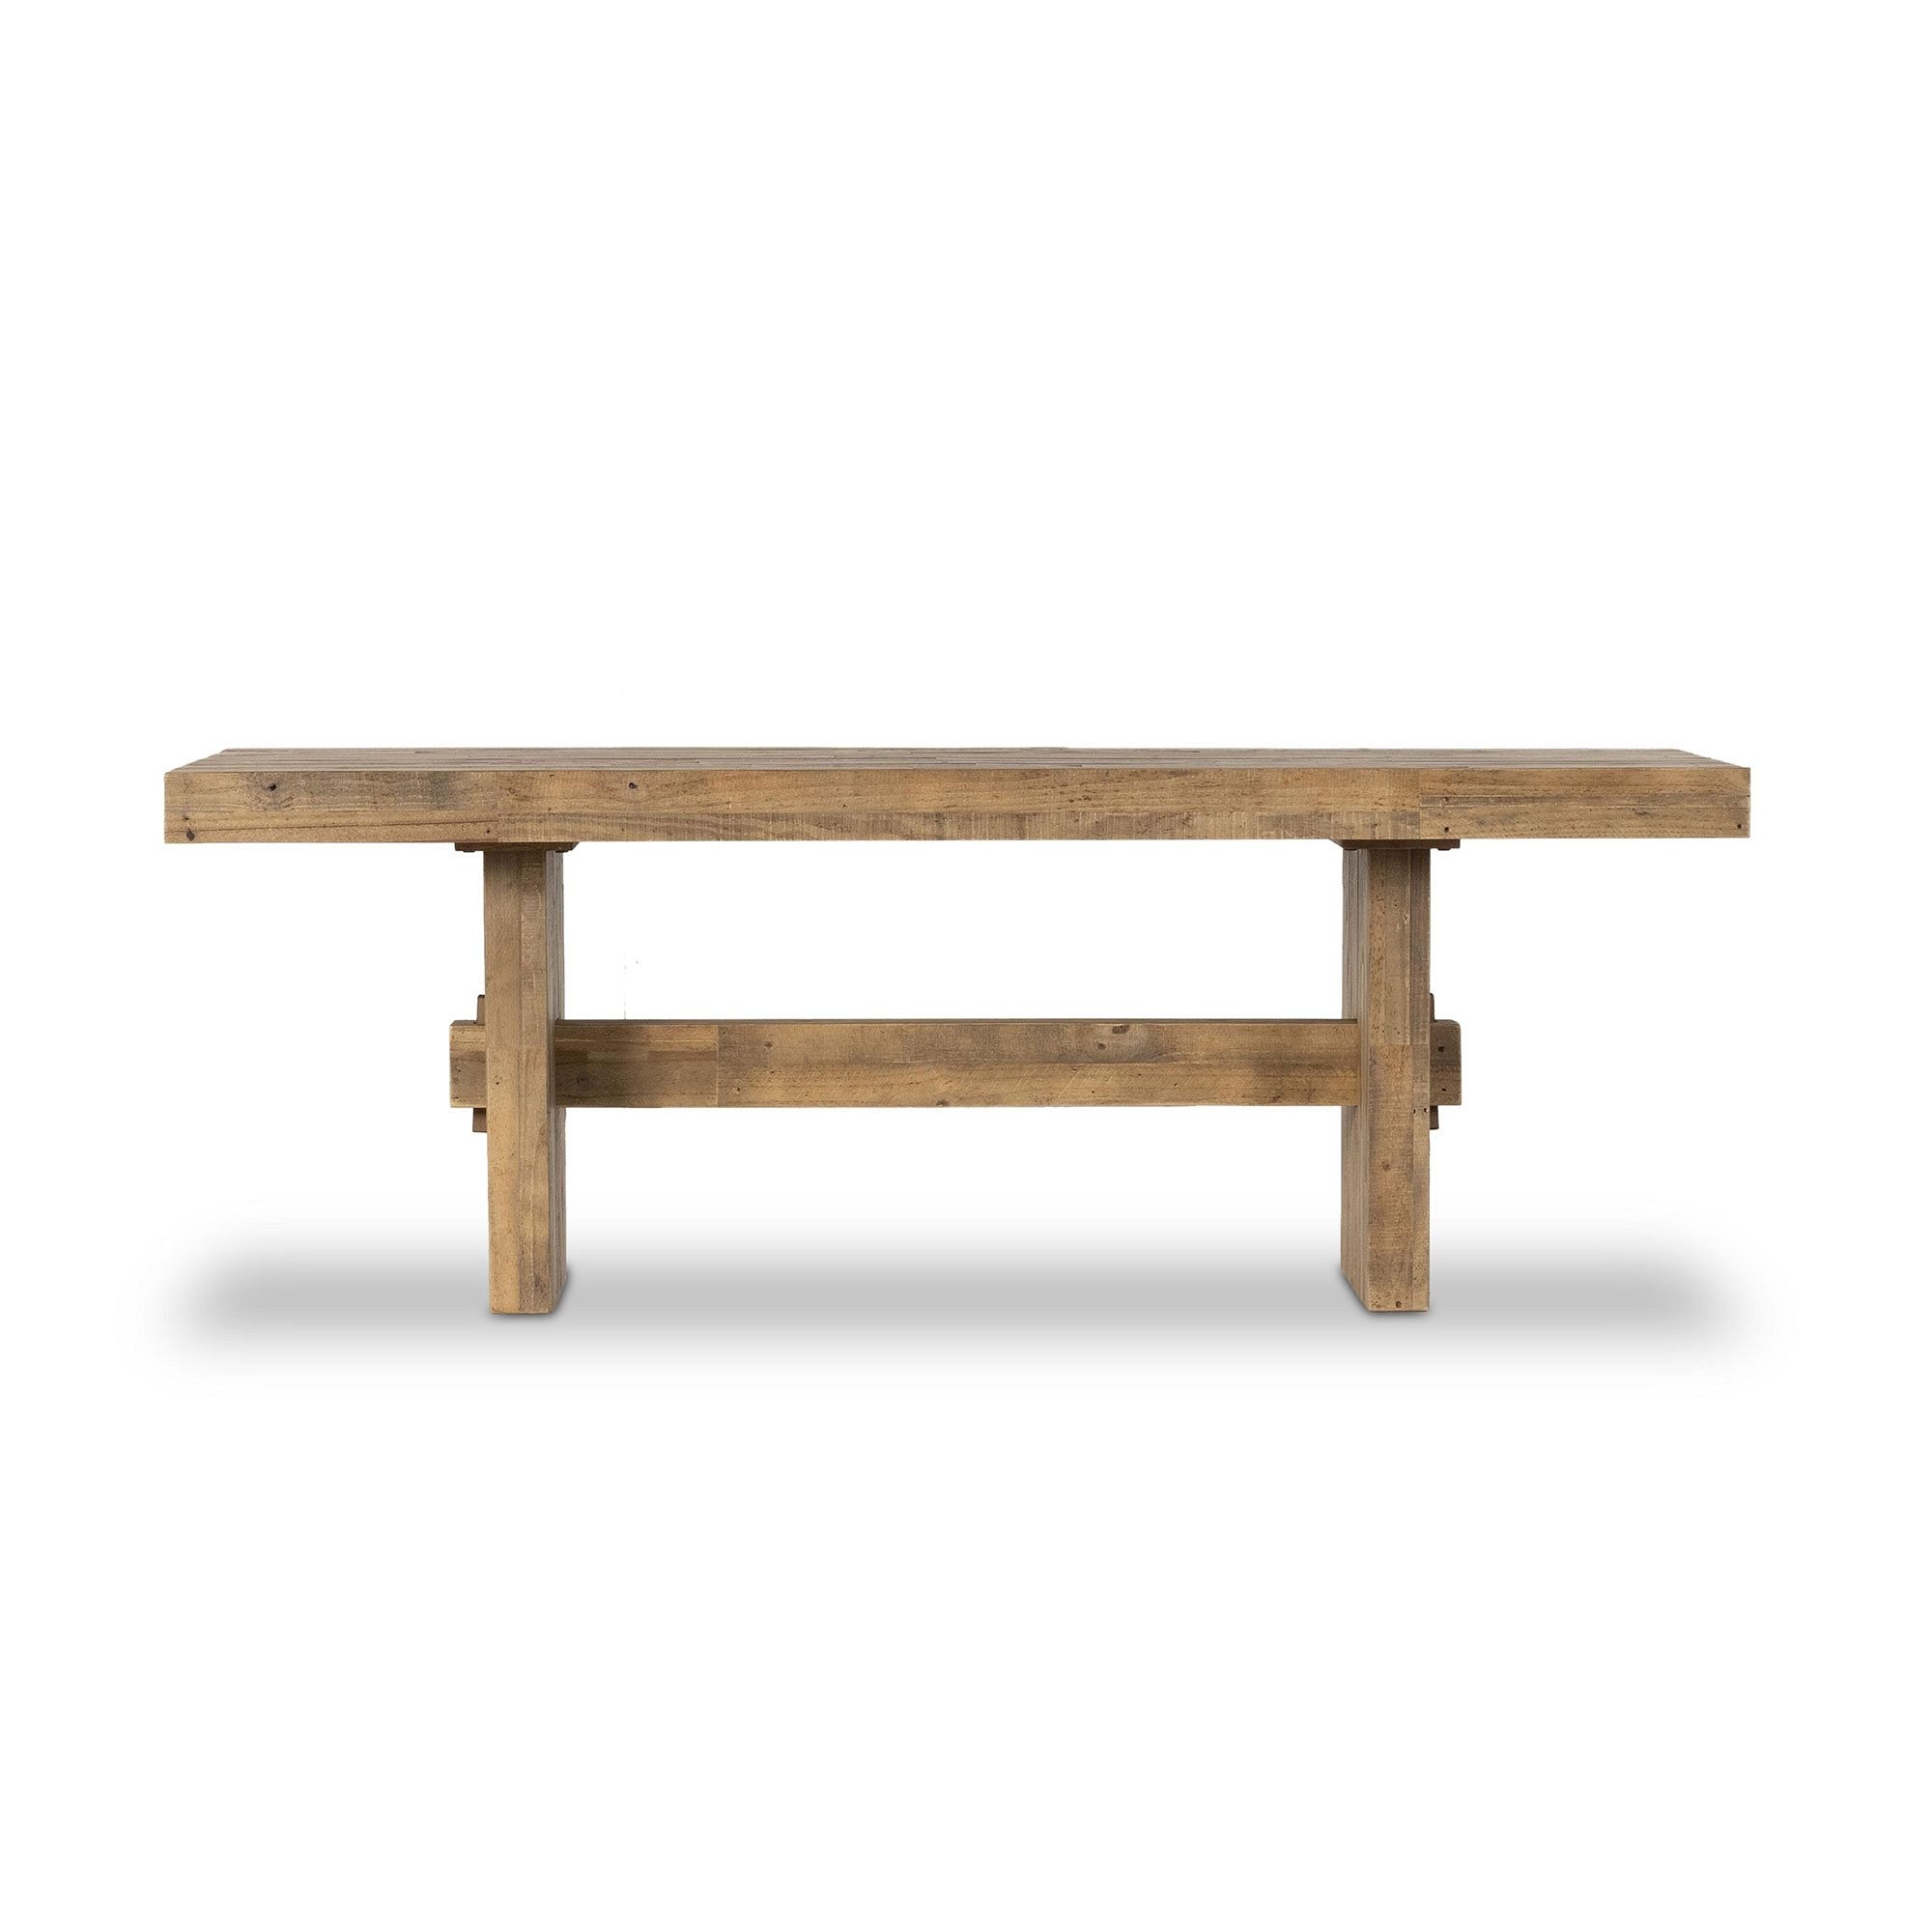 Emmerson(R) 72" Dining Table, Rustic Natural - Image 2